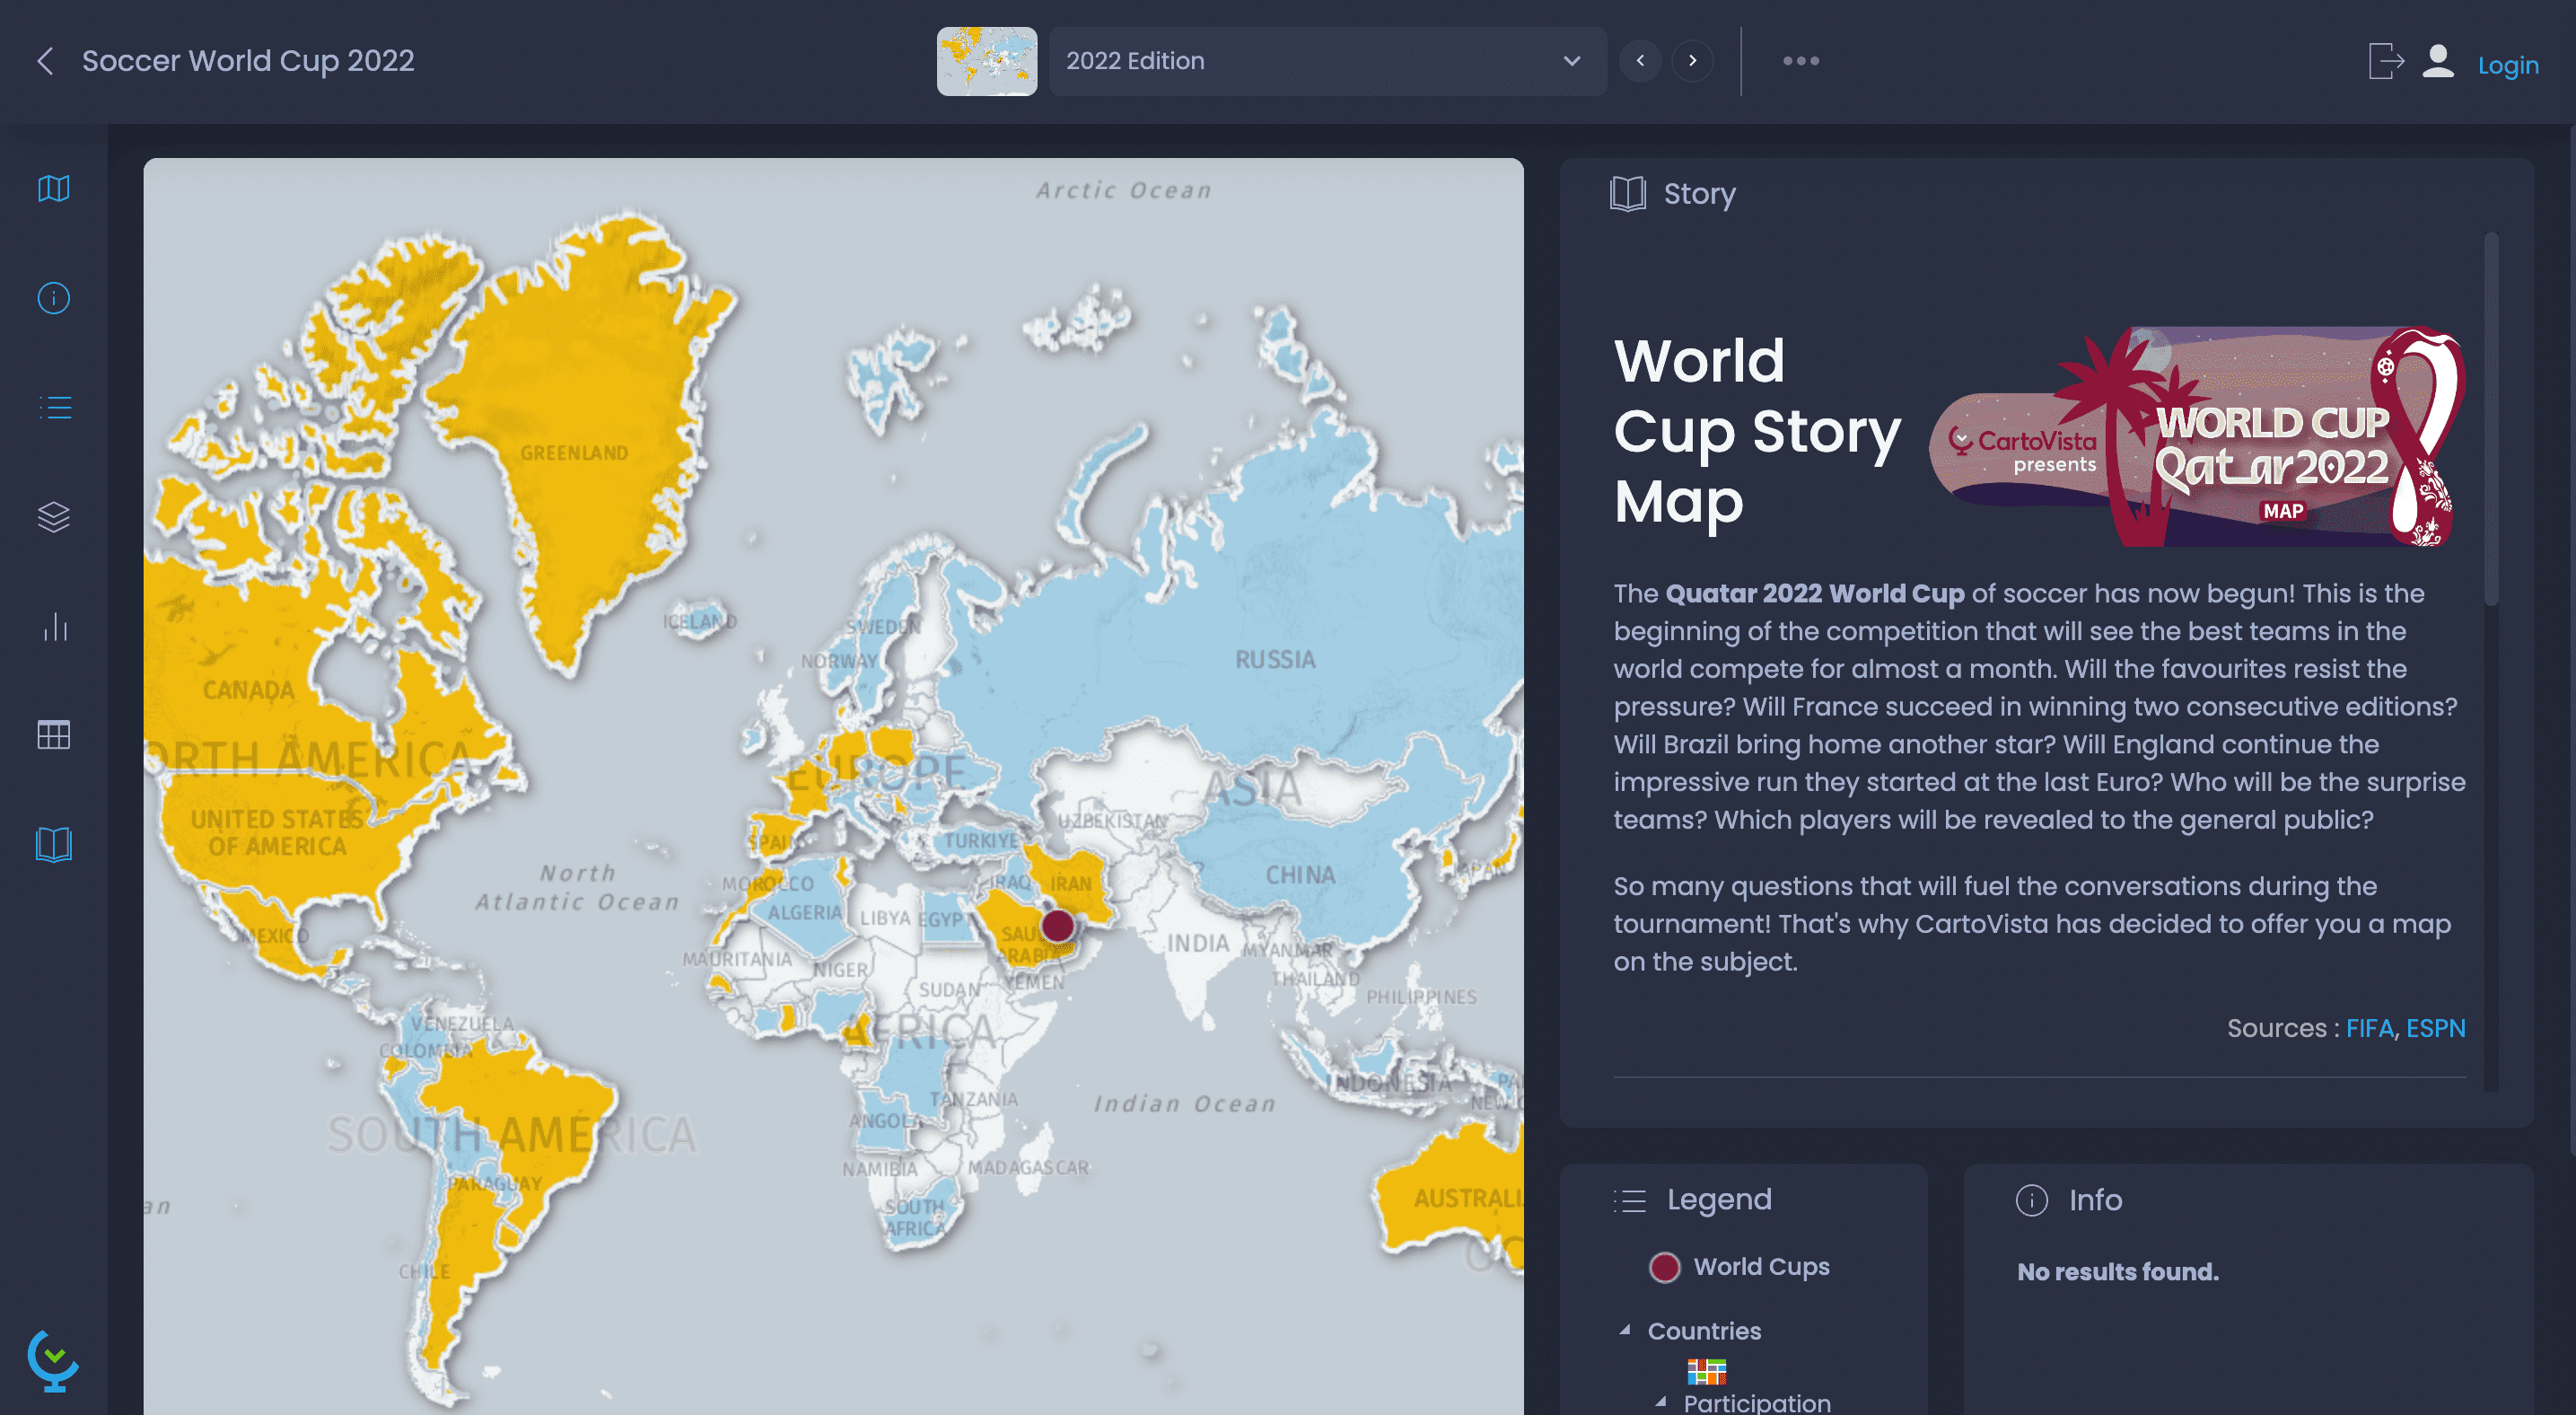 2022 World Cup Story Map